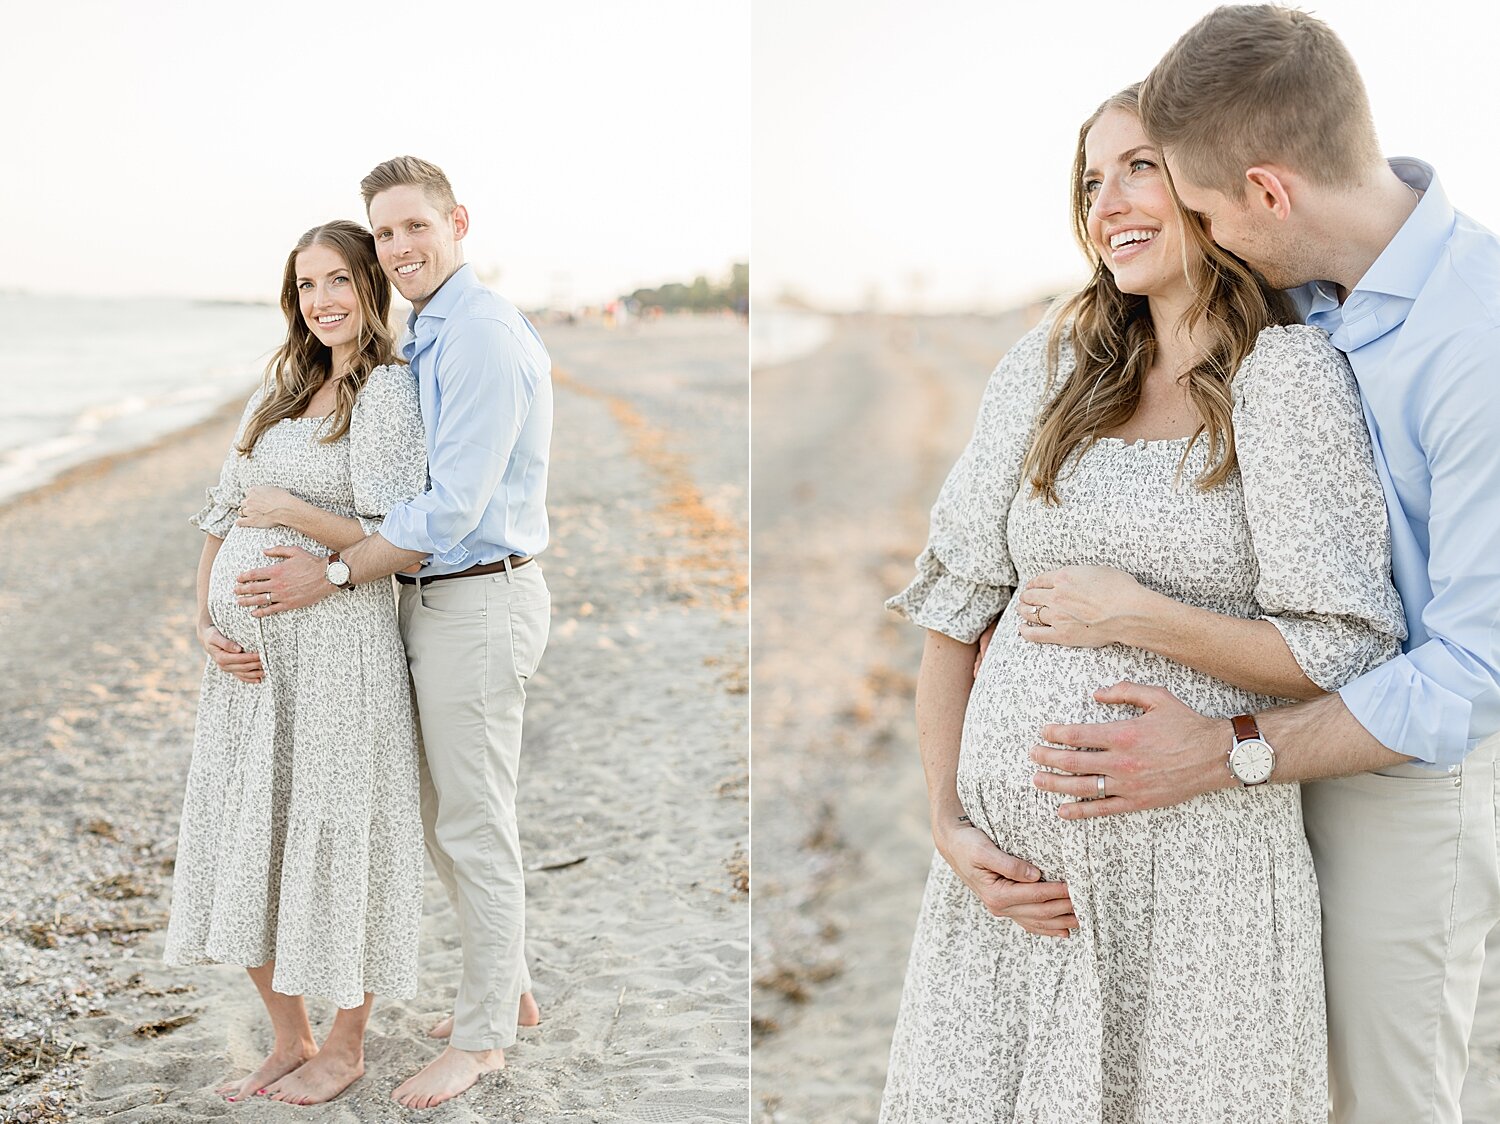 Couple on the beach at Sherwood Island for maternity photoshoot with Kristin Wood Photography.